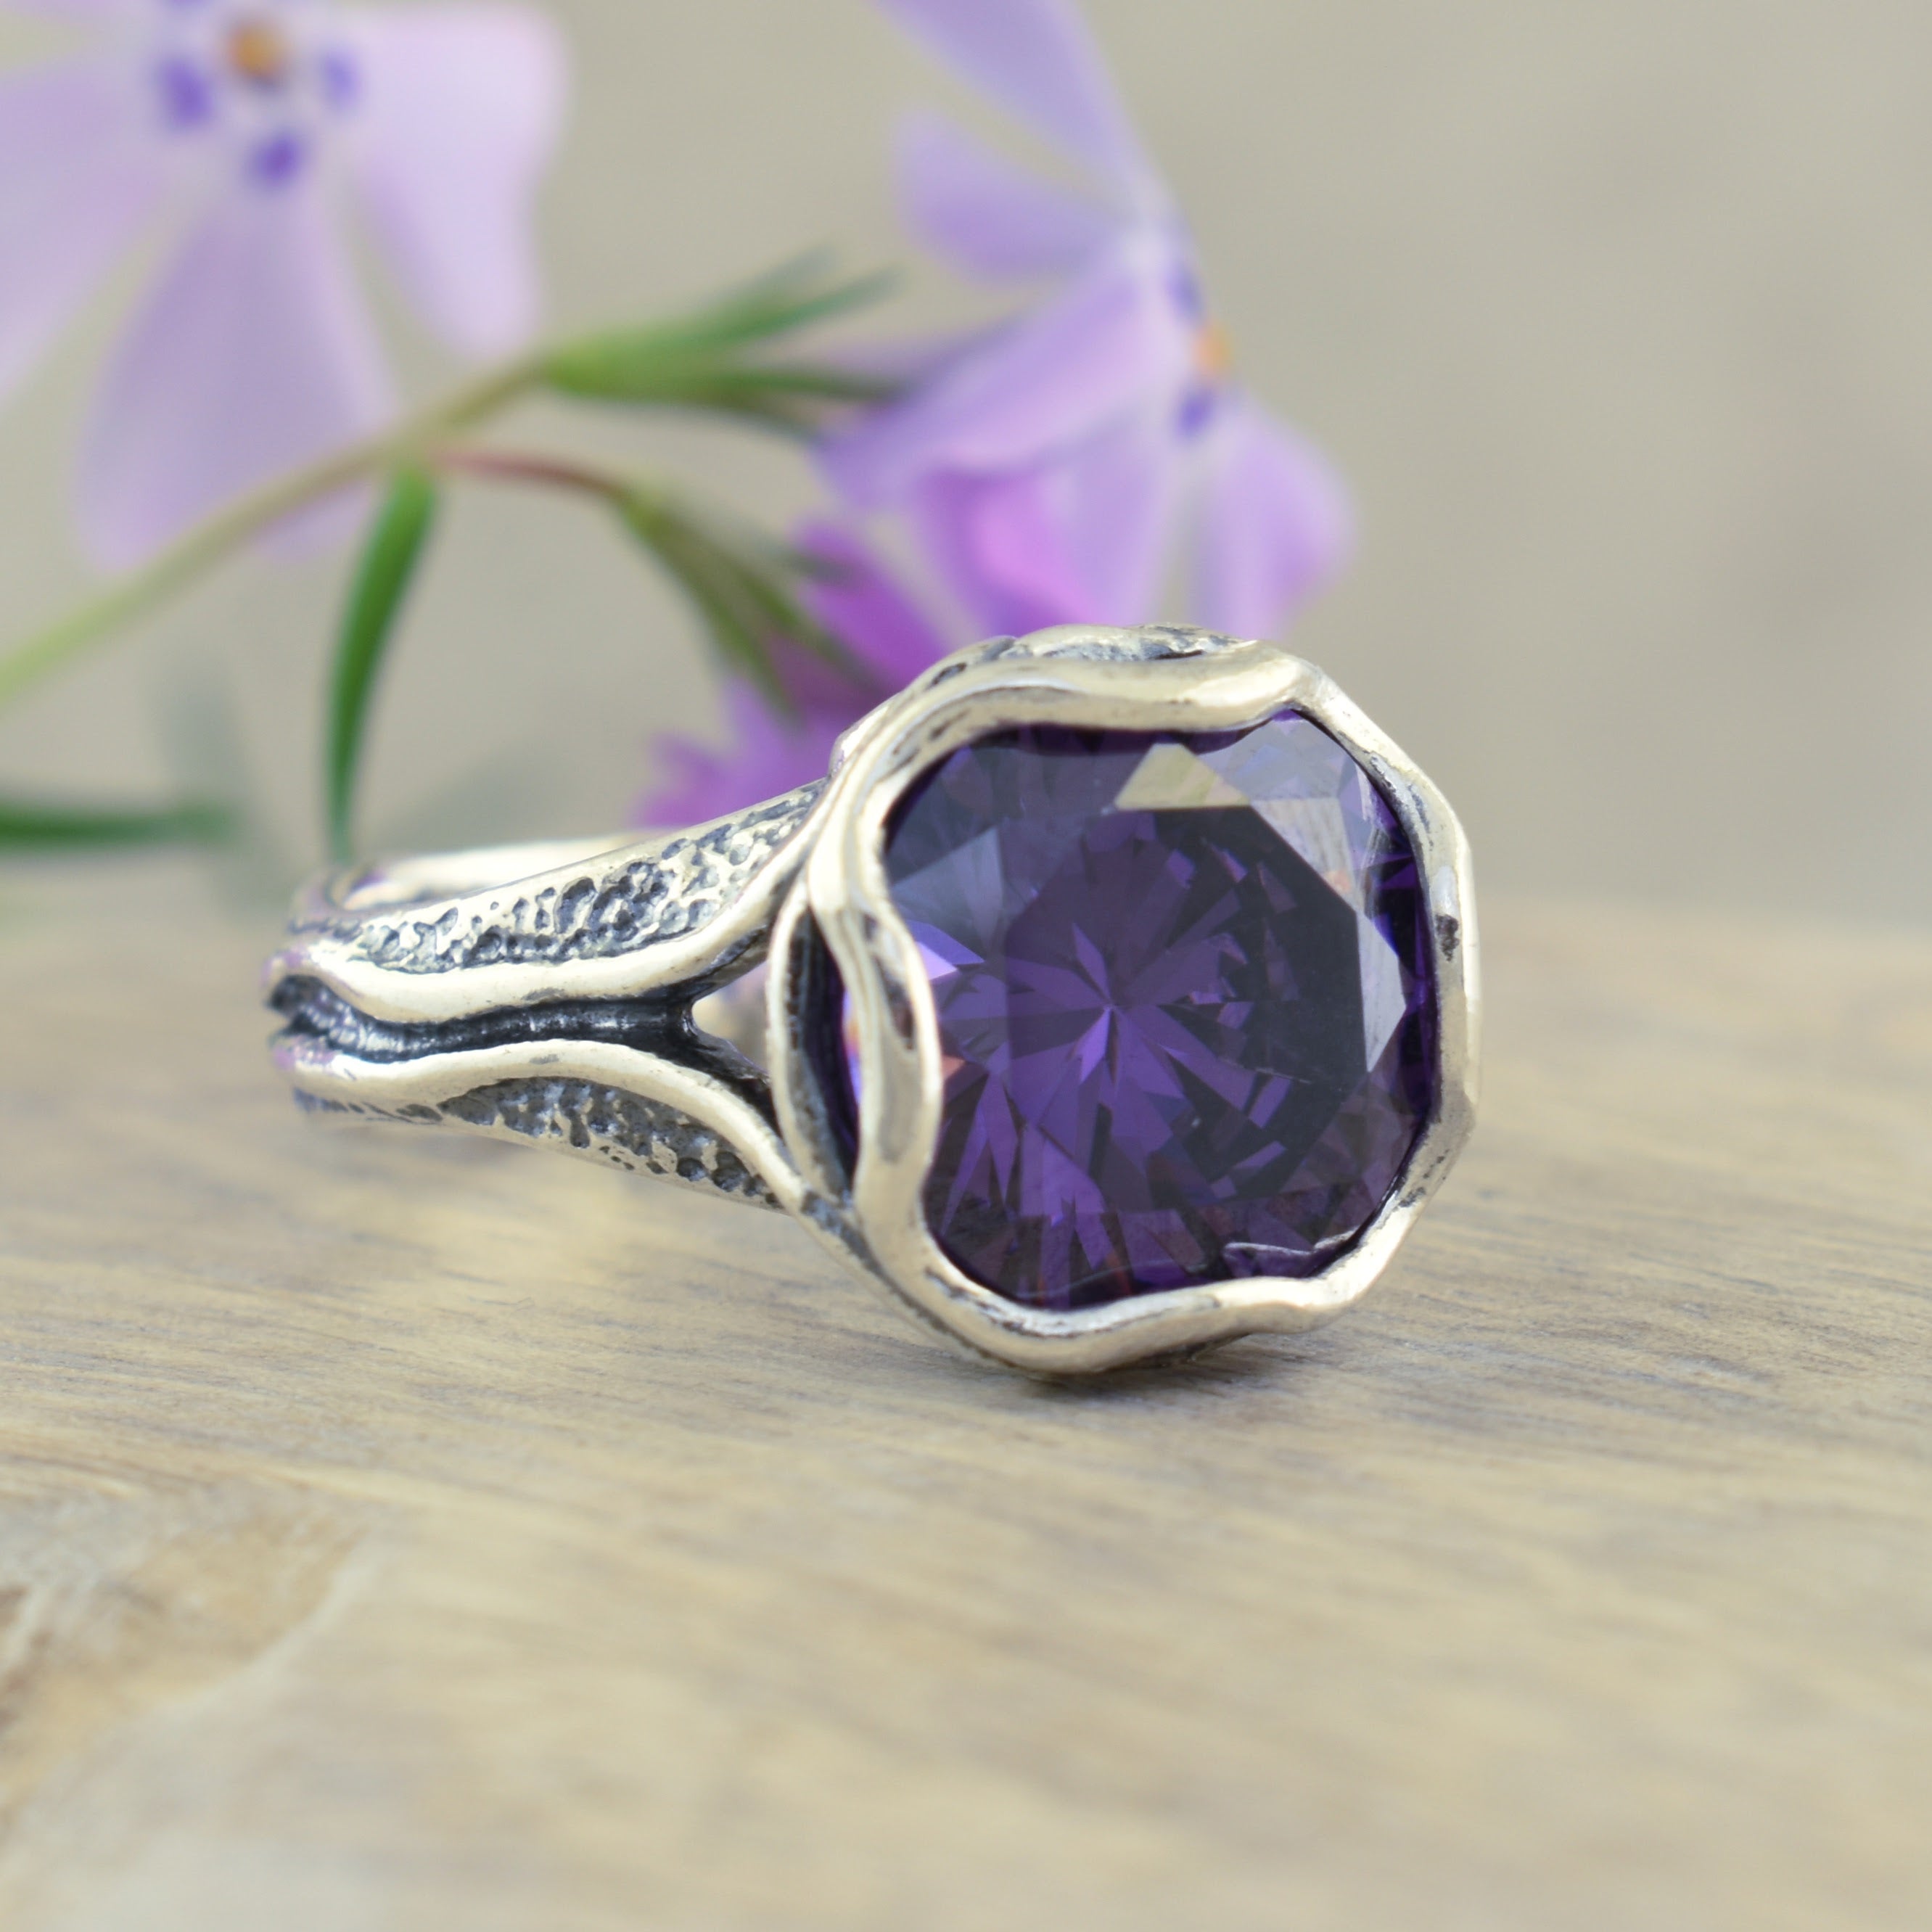 Handcrafted .925 sterling silver and purple amethyst cz ring